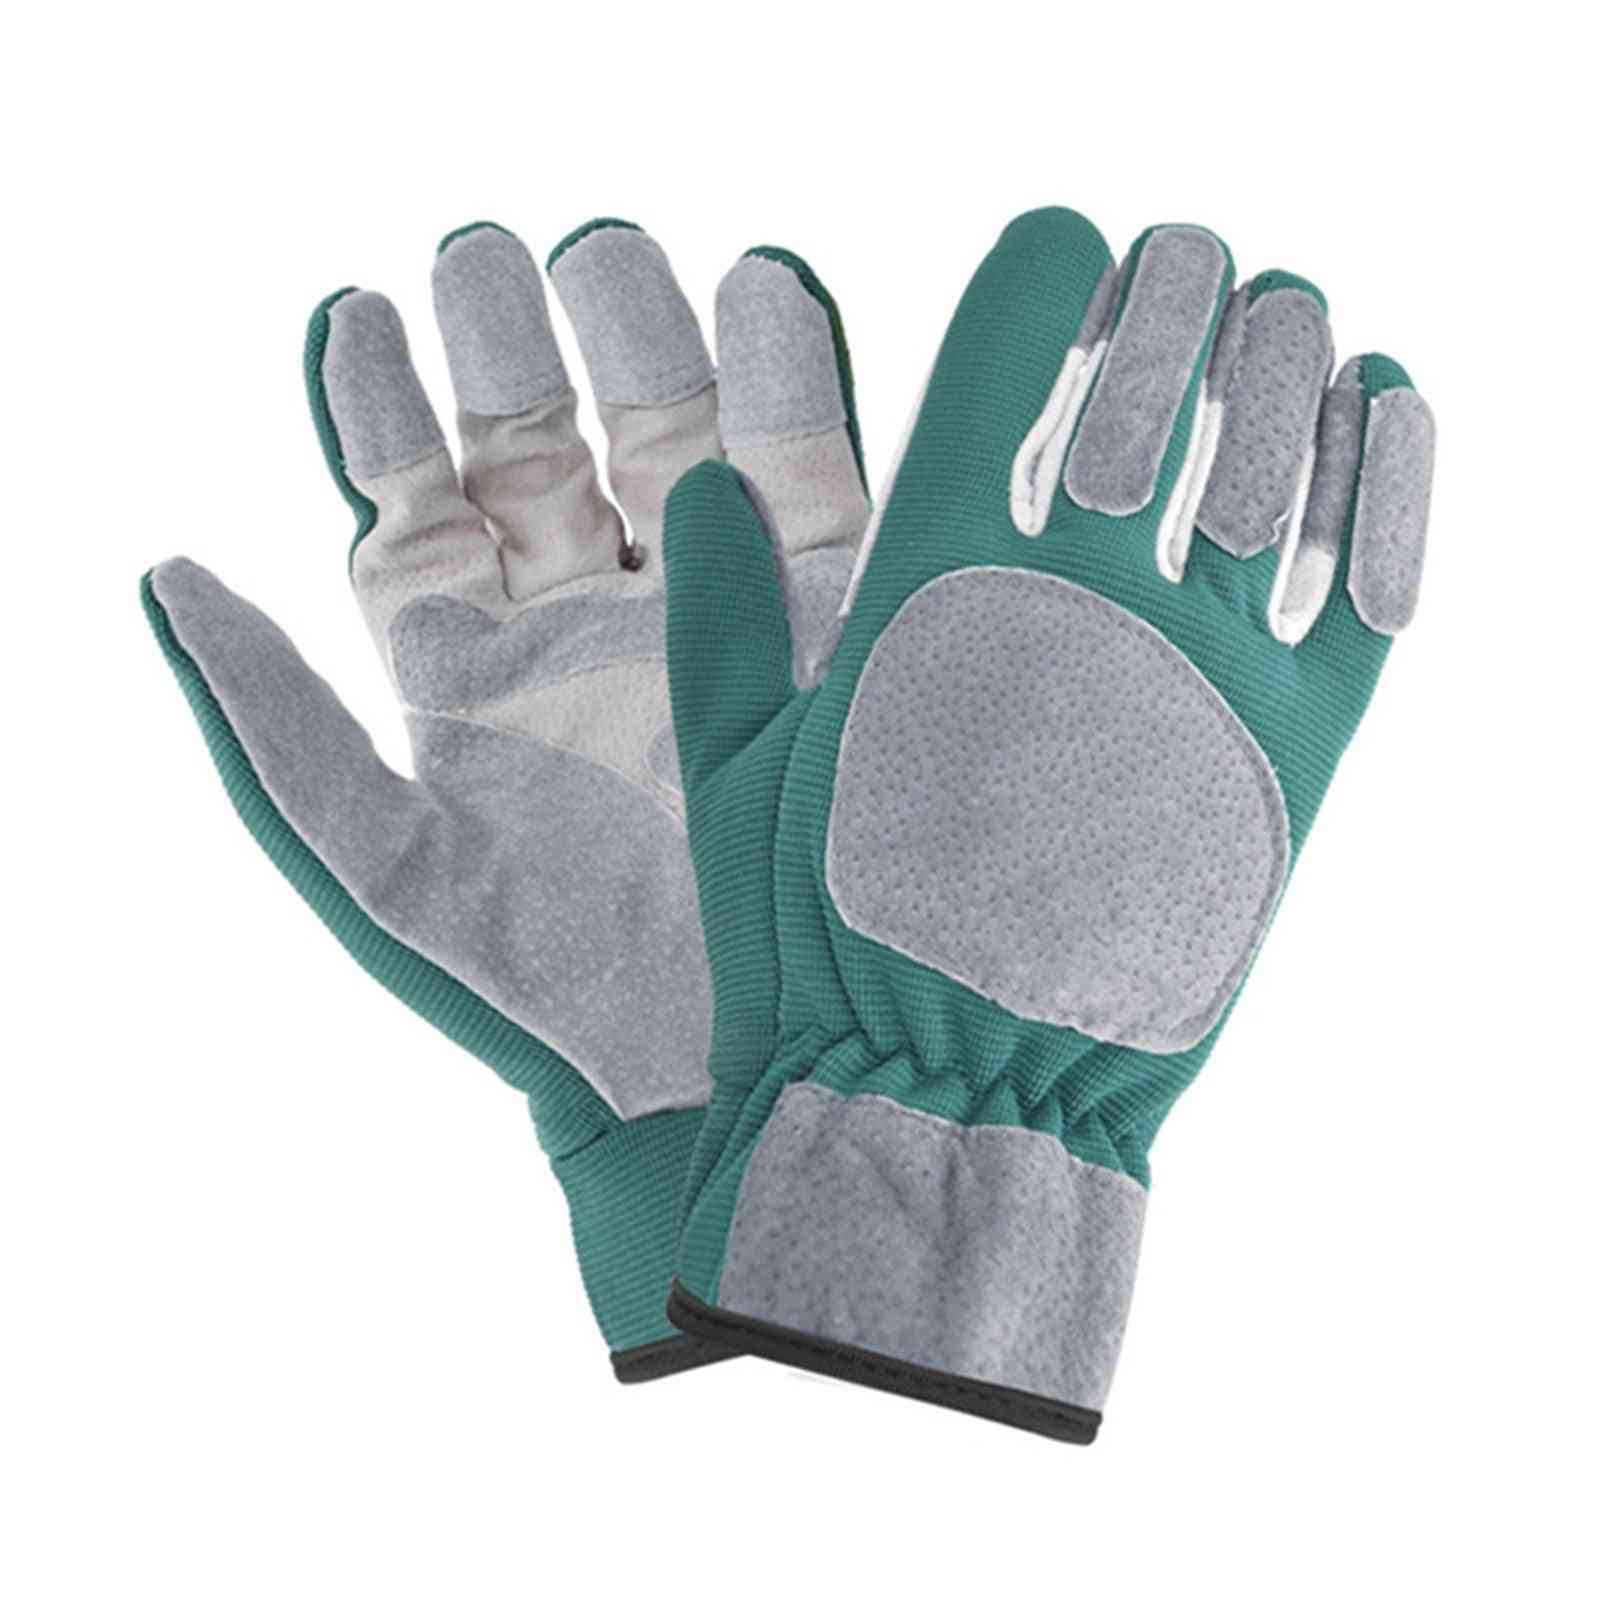 Long Forearm Protection Gloves